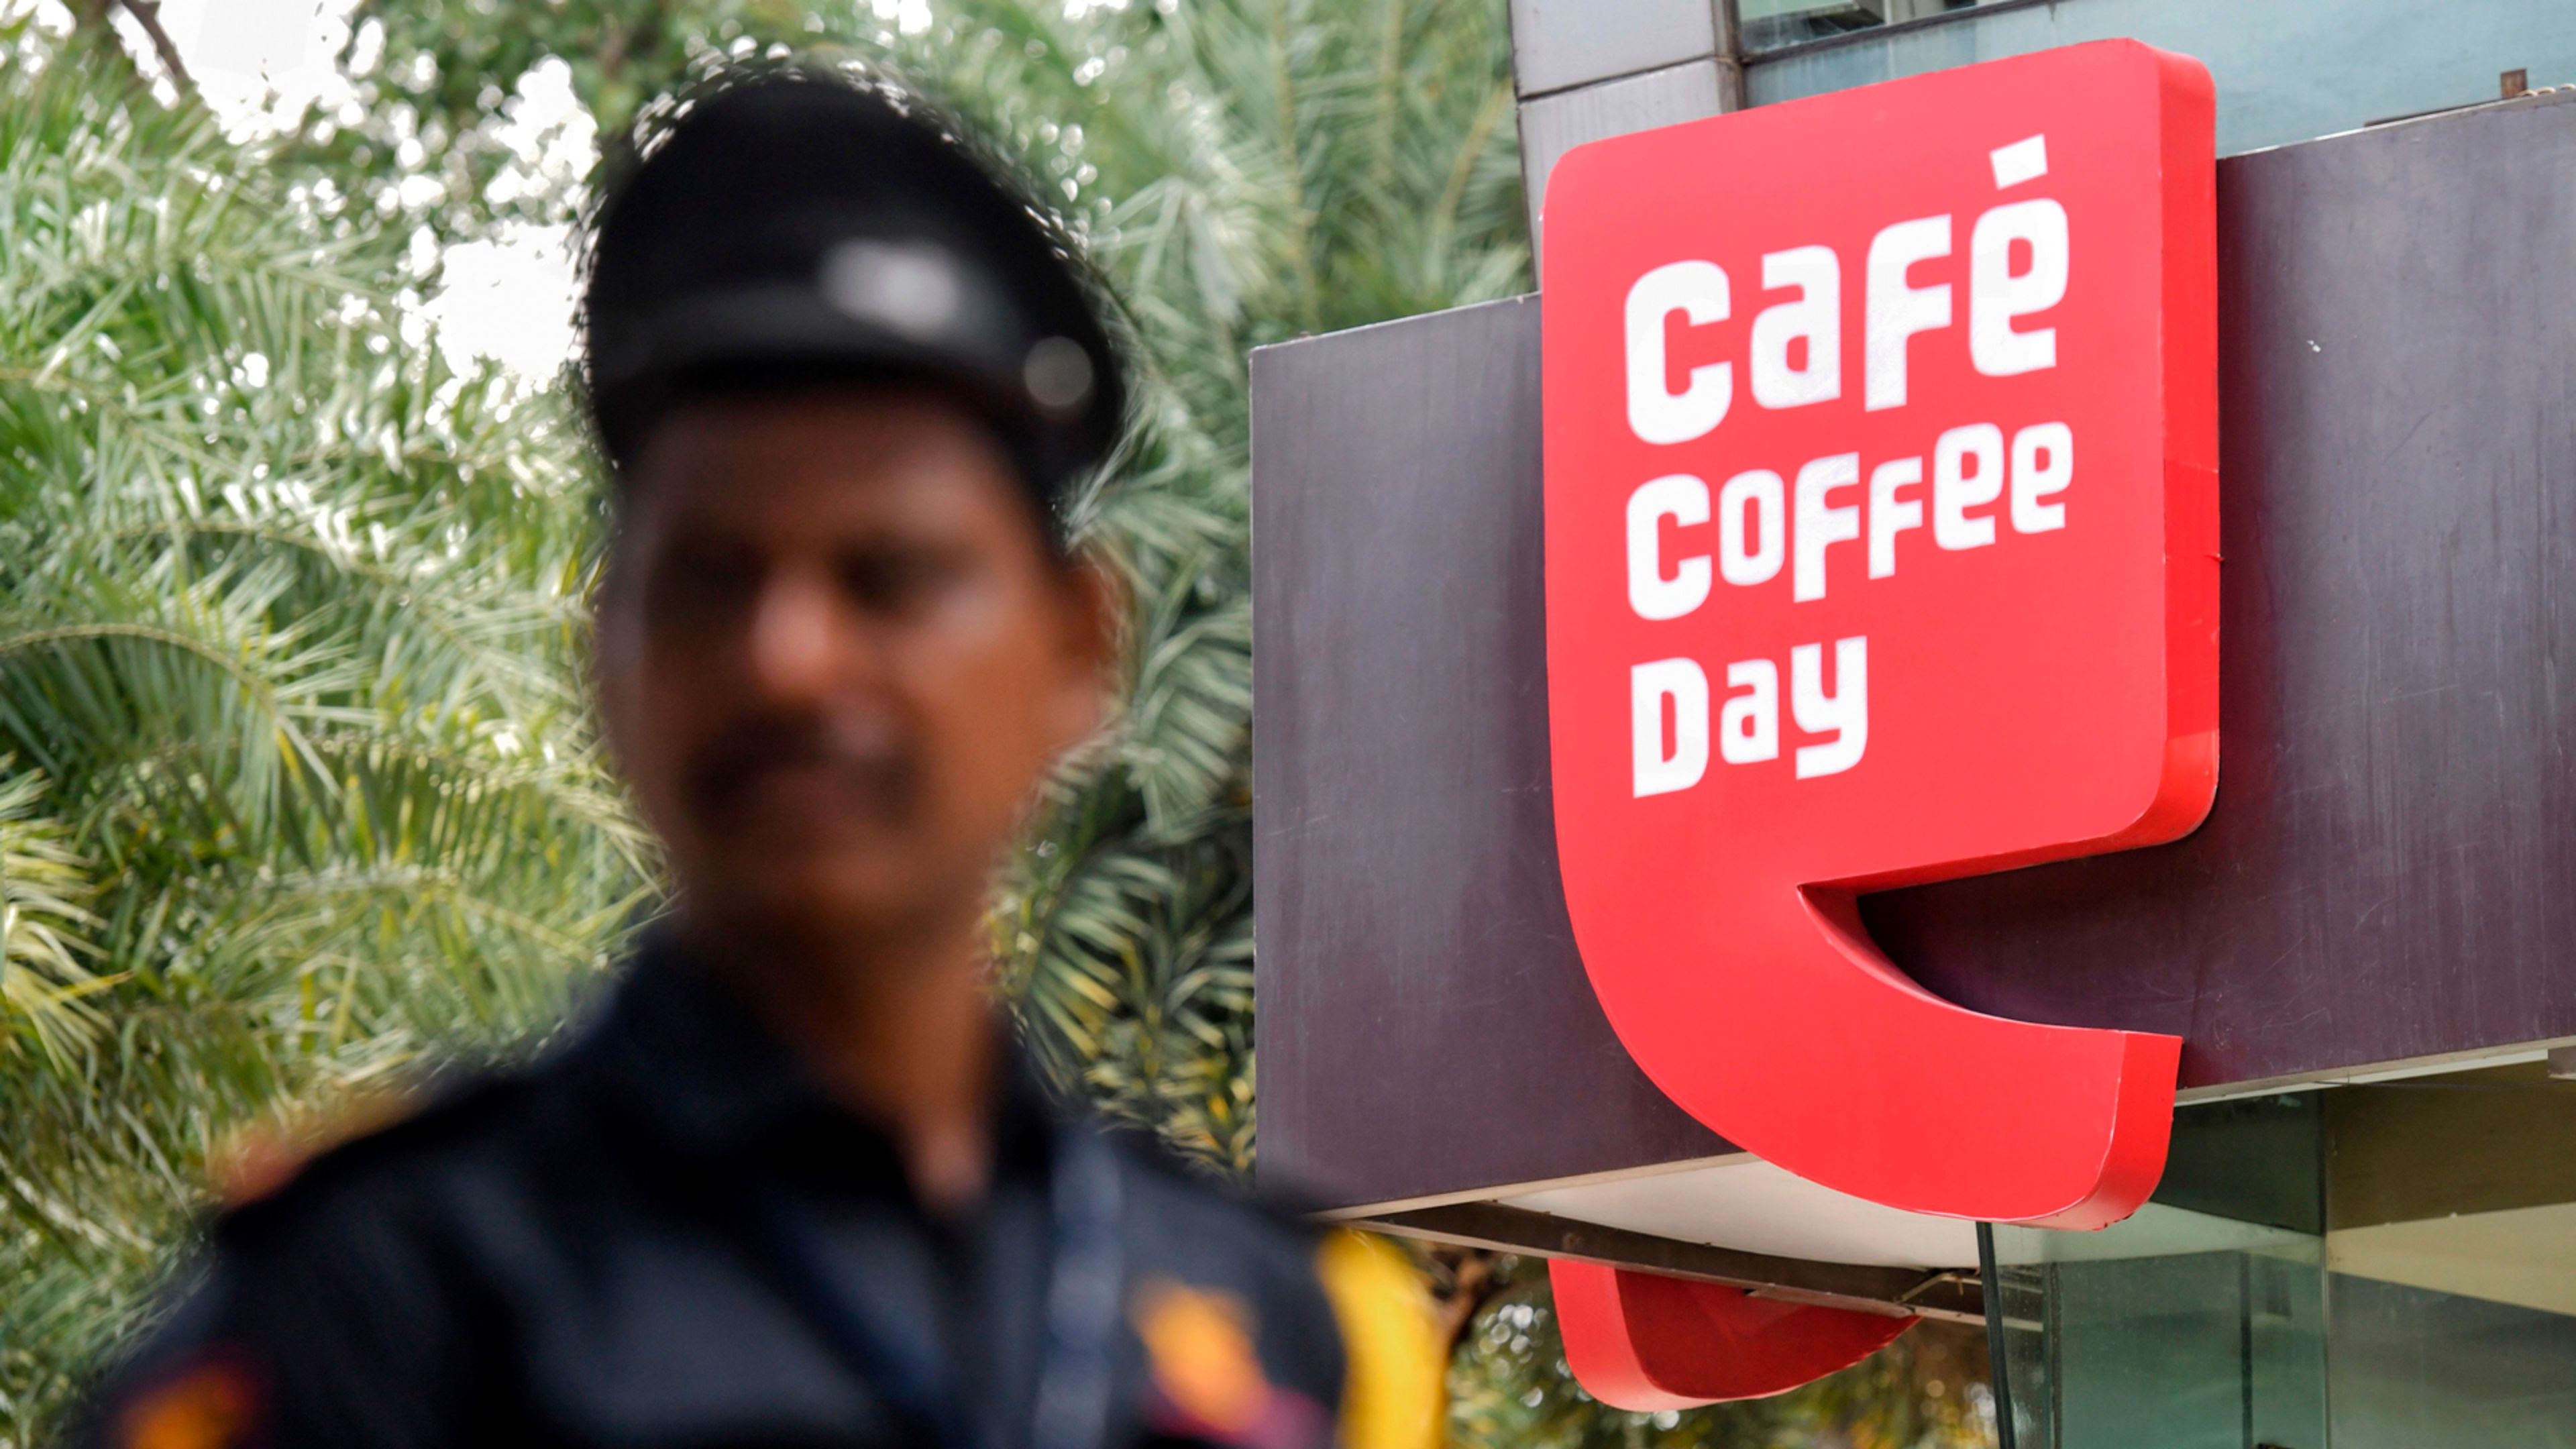 Body of India’s coffee king found floating in river after disappearance